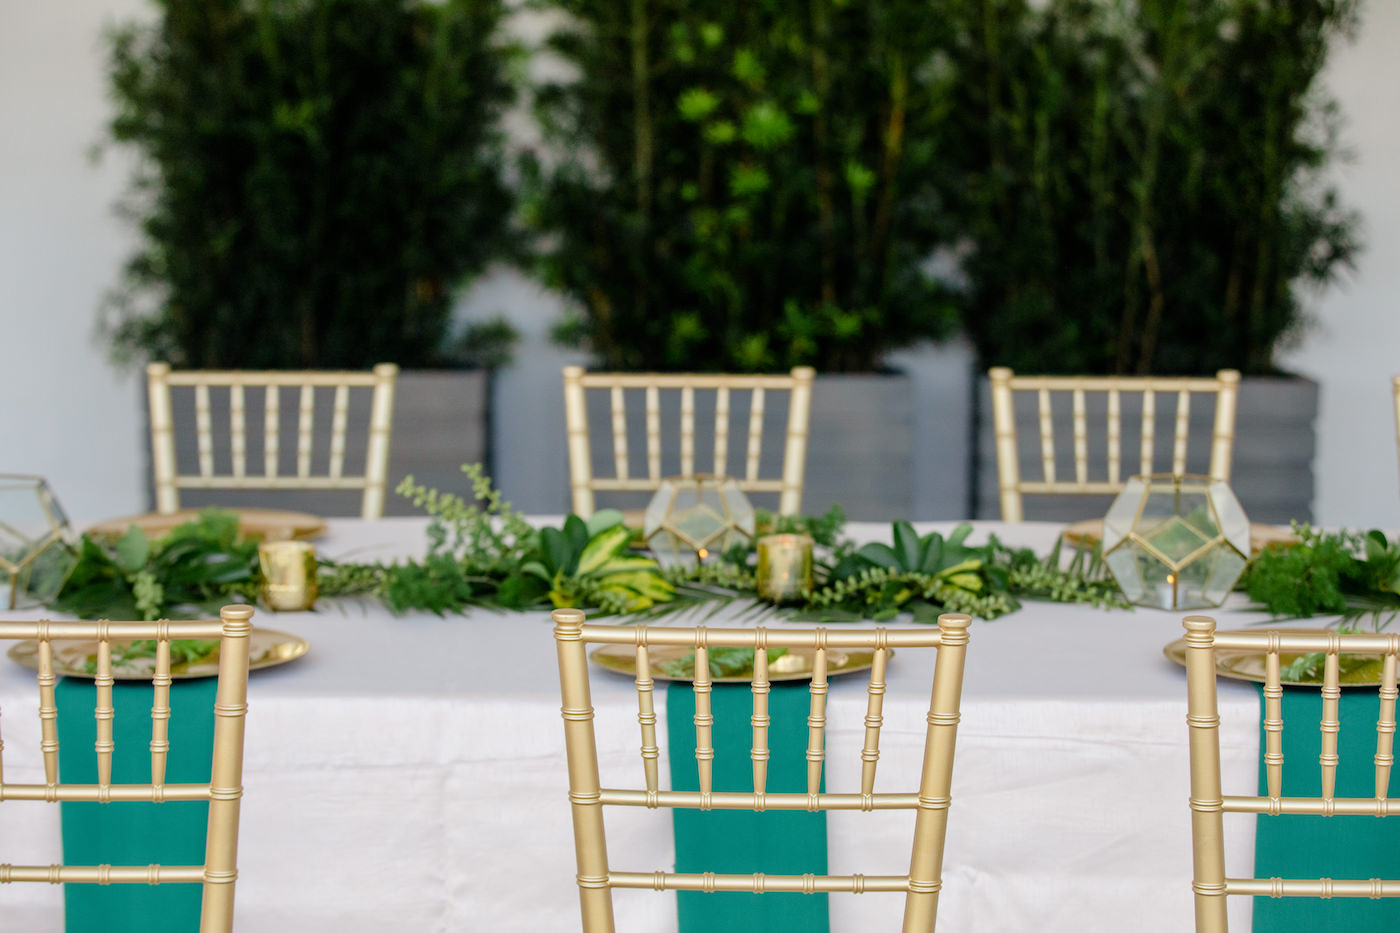 Clearwater Beach Wedding Venue Hilton Clearwater Beach | Modern Tropical Beach Outdoor Wedding Reception Terrace Feasting Table with Champagne Table Linens and Emerald Green Napkins under Gold Charger Plates topped with Ferns | Gold Chiavari Chairs and Tropical Palm Frond Leaf Floral Arrangement Garland and Gold Geometric Candles